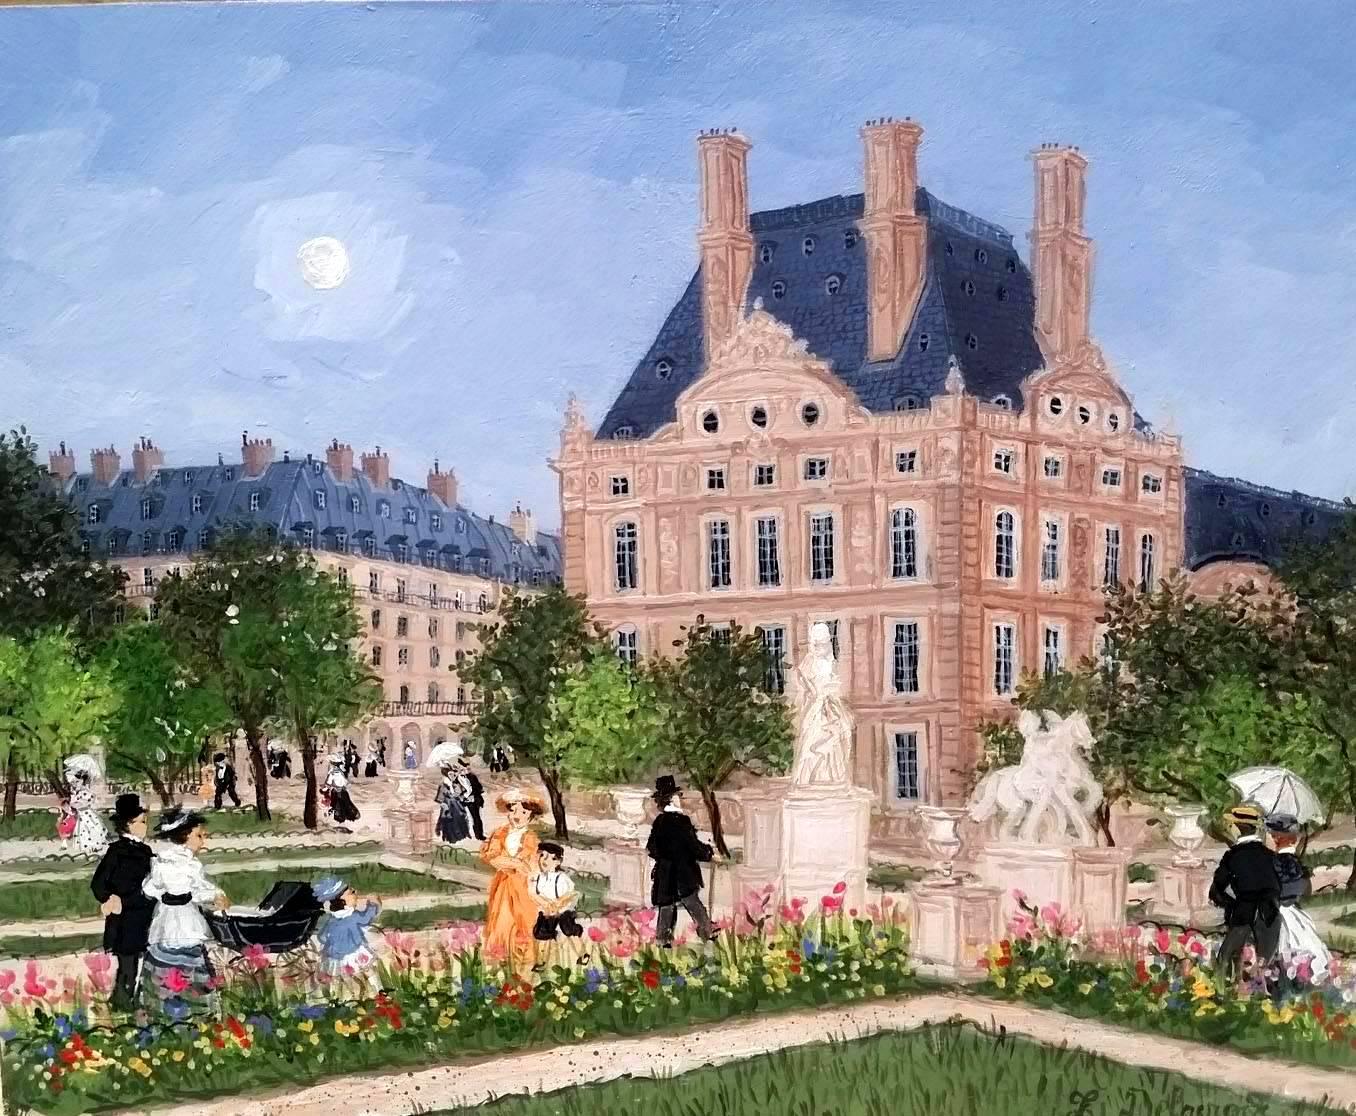 This charming acrylic painting depicts a Parisian garden with decadent french architecture. The colors are bright, using greens and blues to create a calm and joyful atmosphere.

Fabienne Delacroix is the youngest child of the master naïf painter